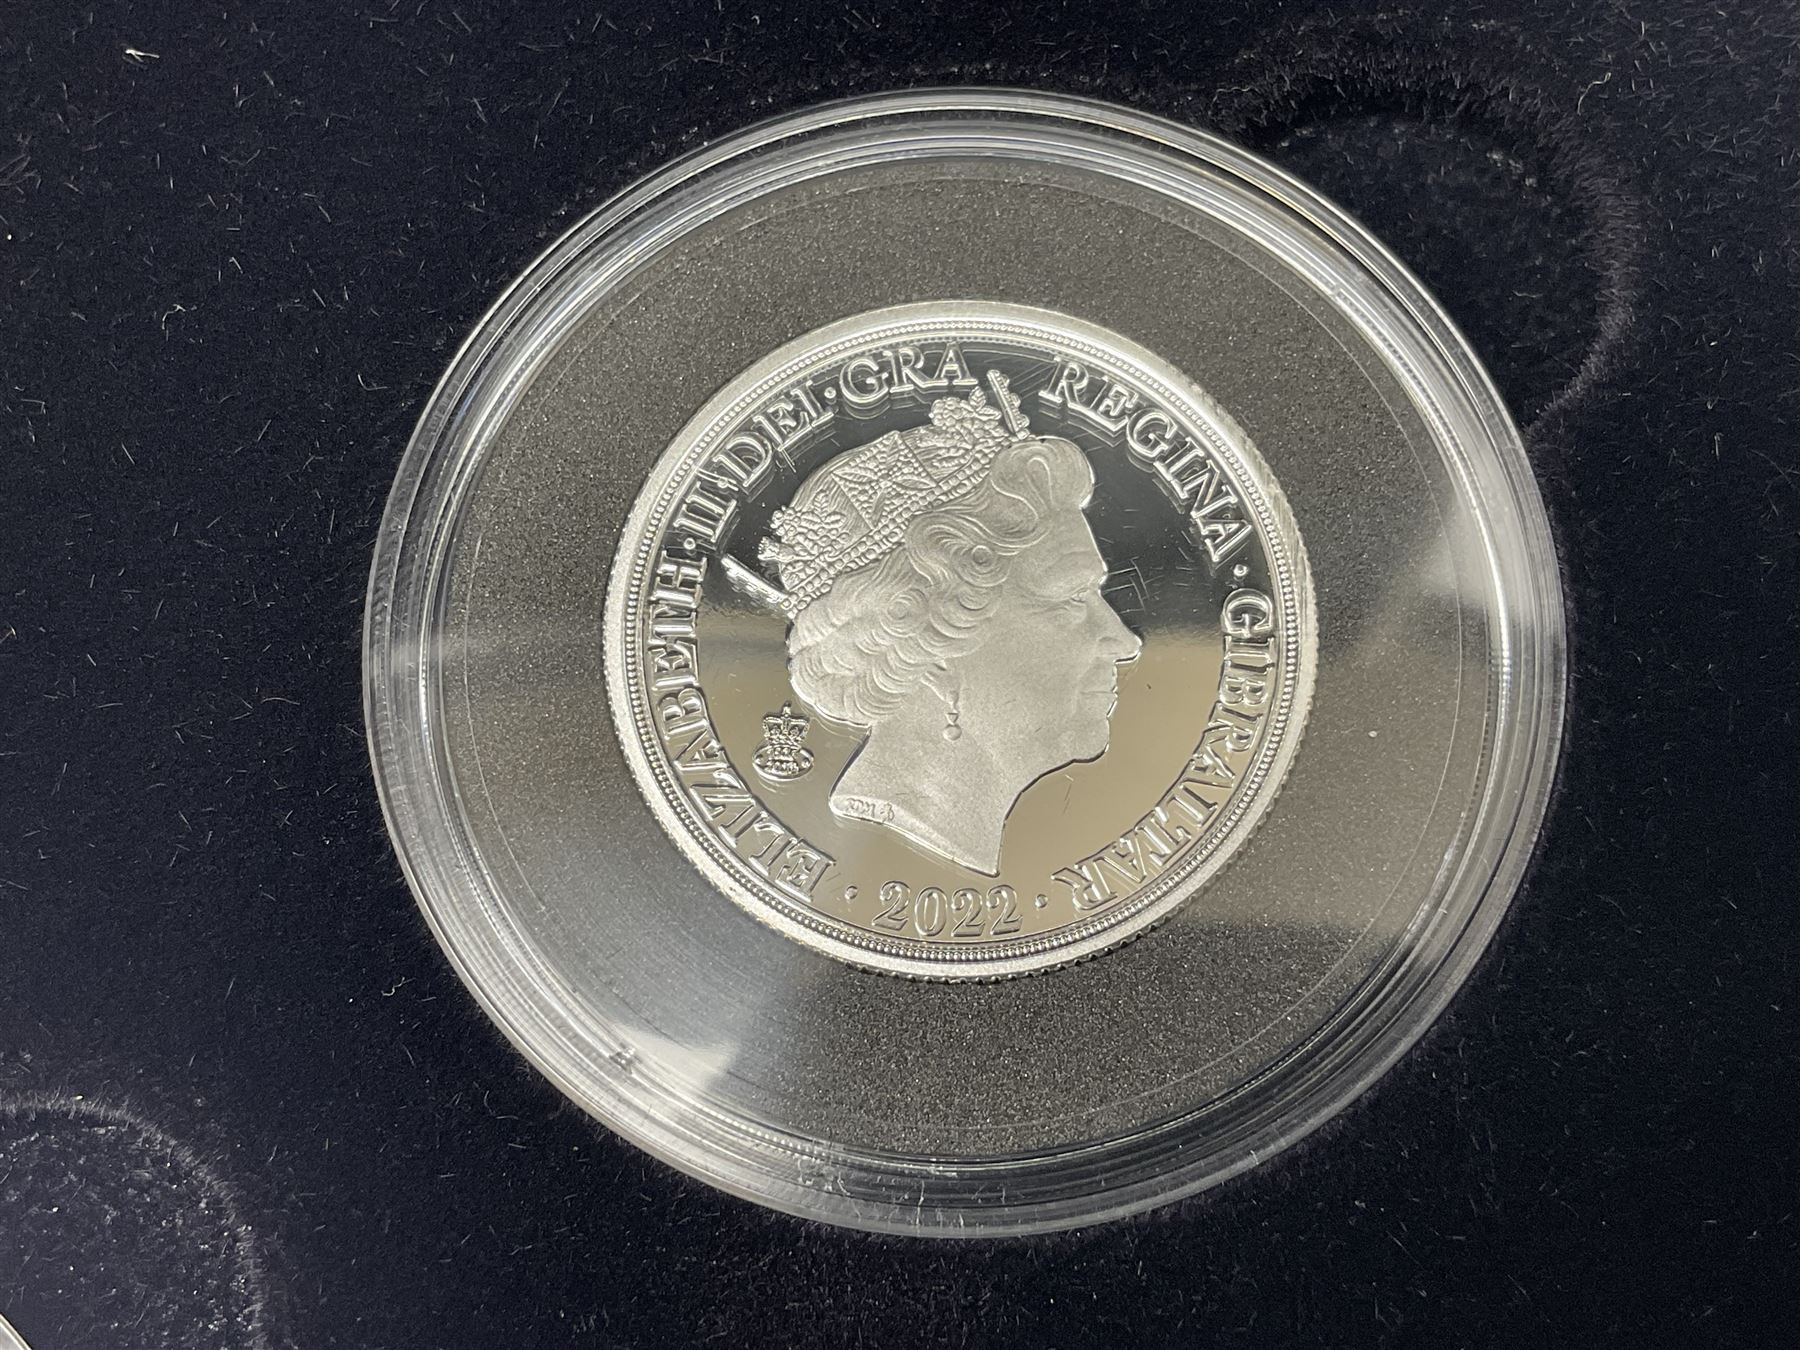 Queen Elizabeth II Gibraltar 2002 five coin silver-proof collection - Image 9 of 13